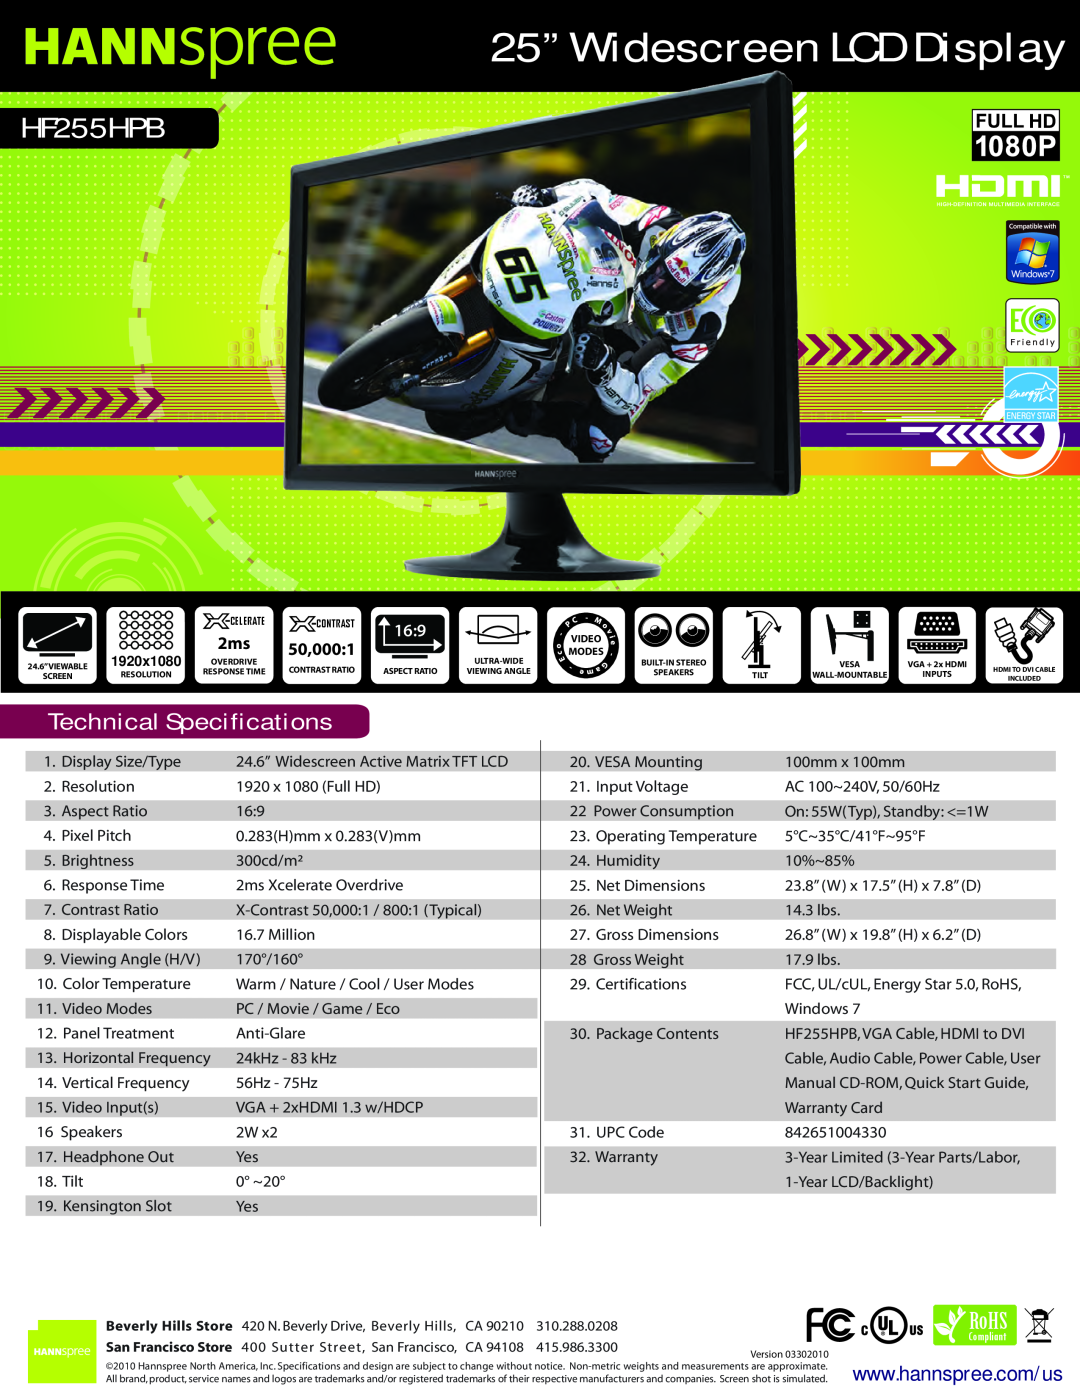 HANNspree HF225DPB technical specifications 25” Widescreen LCD Display, HF255HPBHF22D, Technical Specifications, 50,0001 